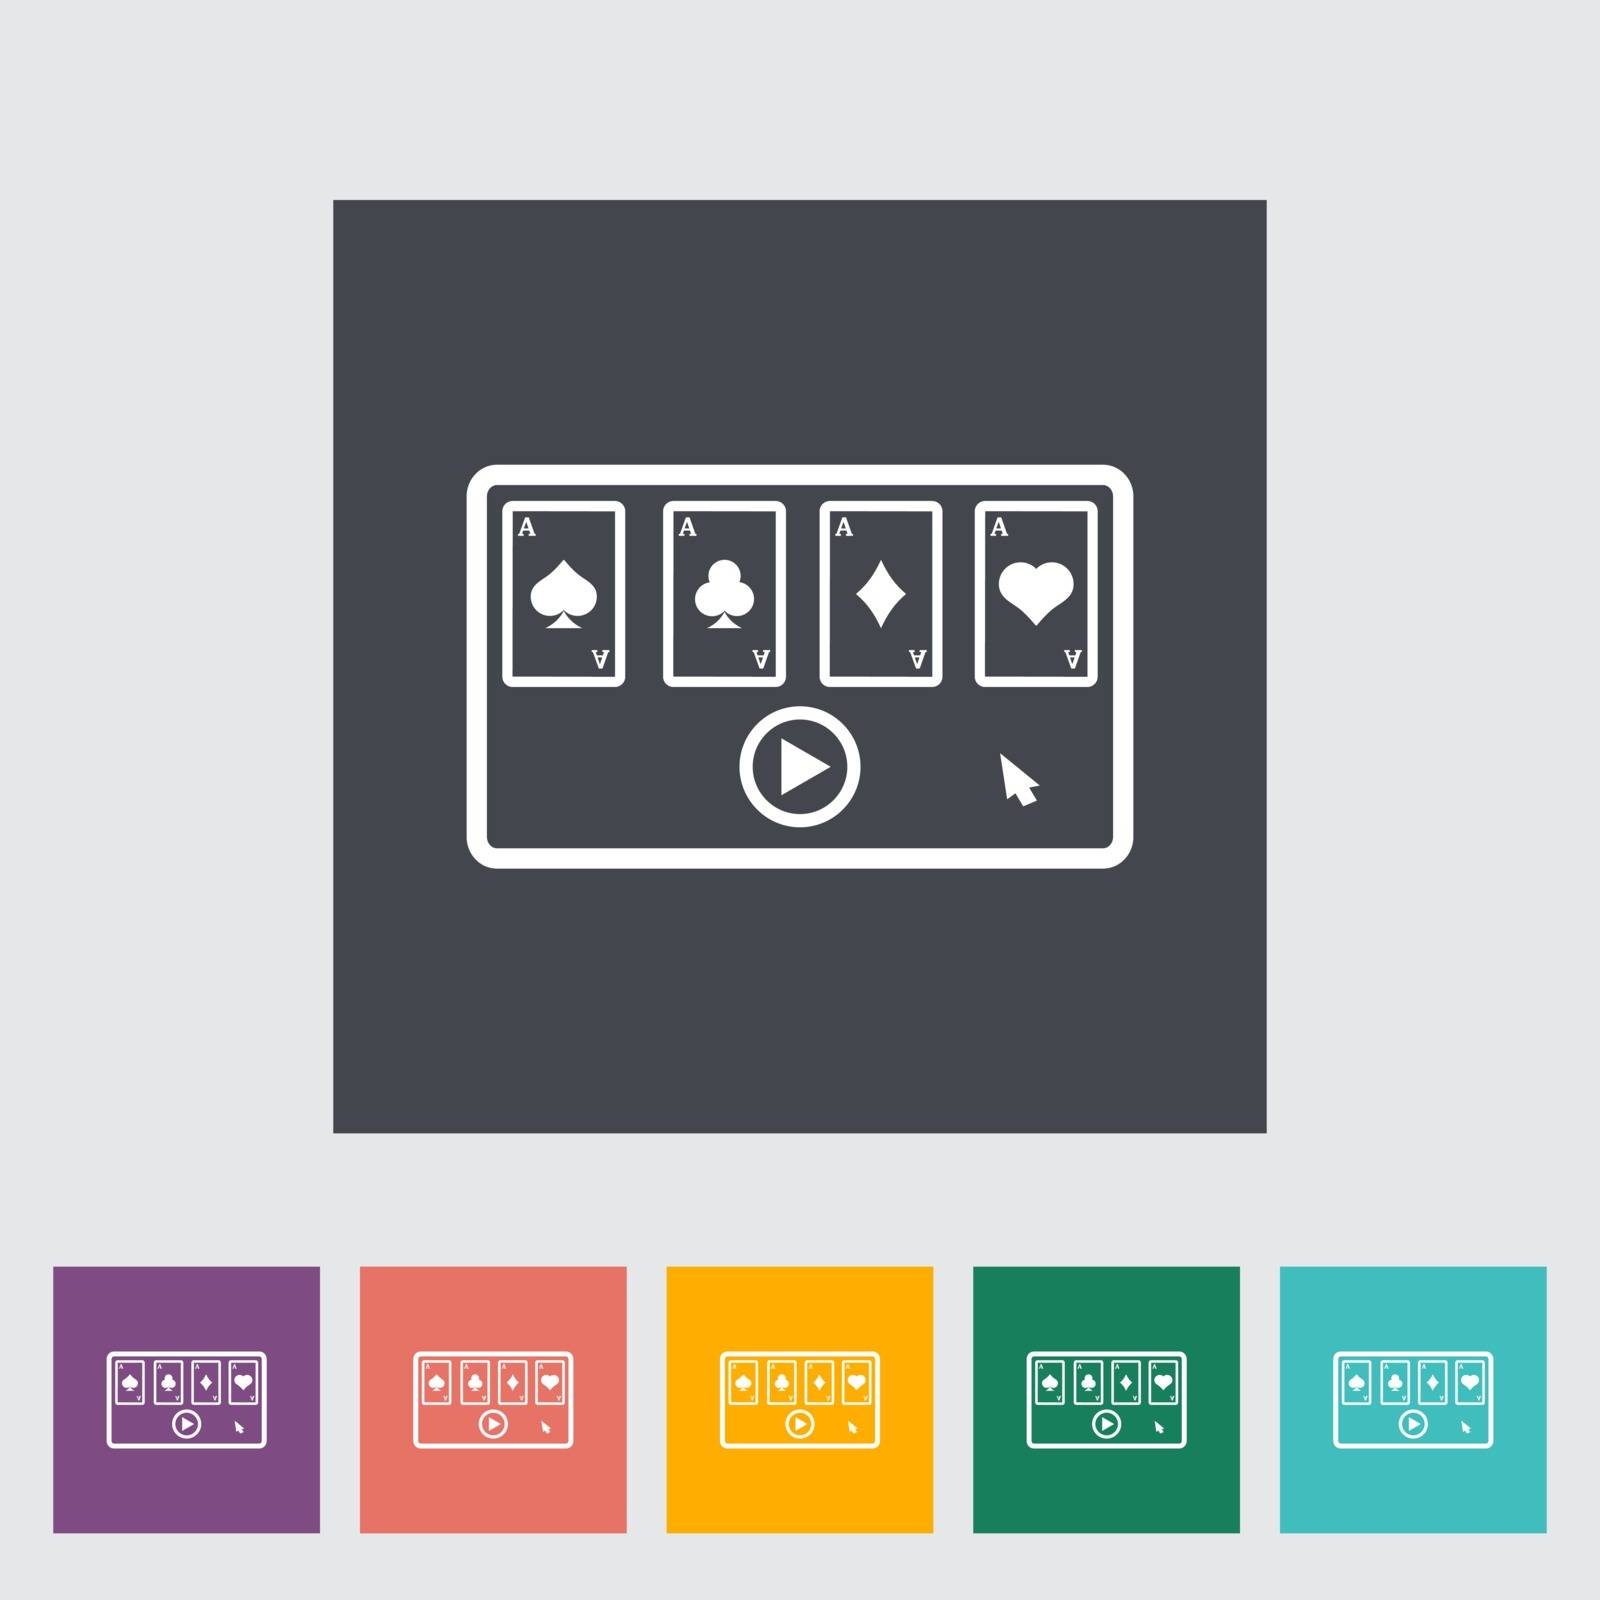 Video game. Single flat icon on the button. Vector illustration.